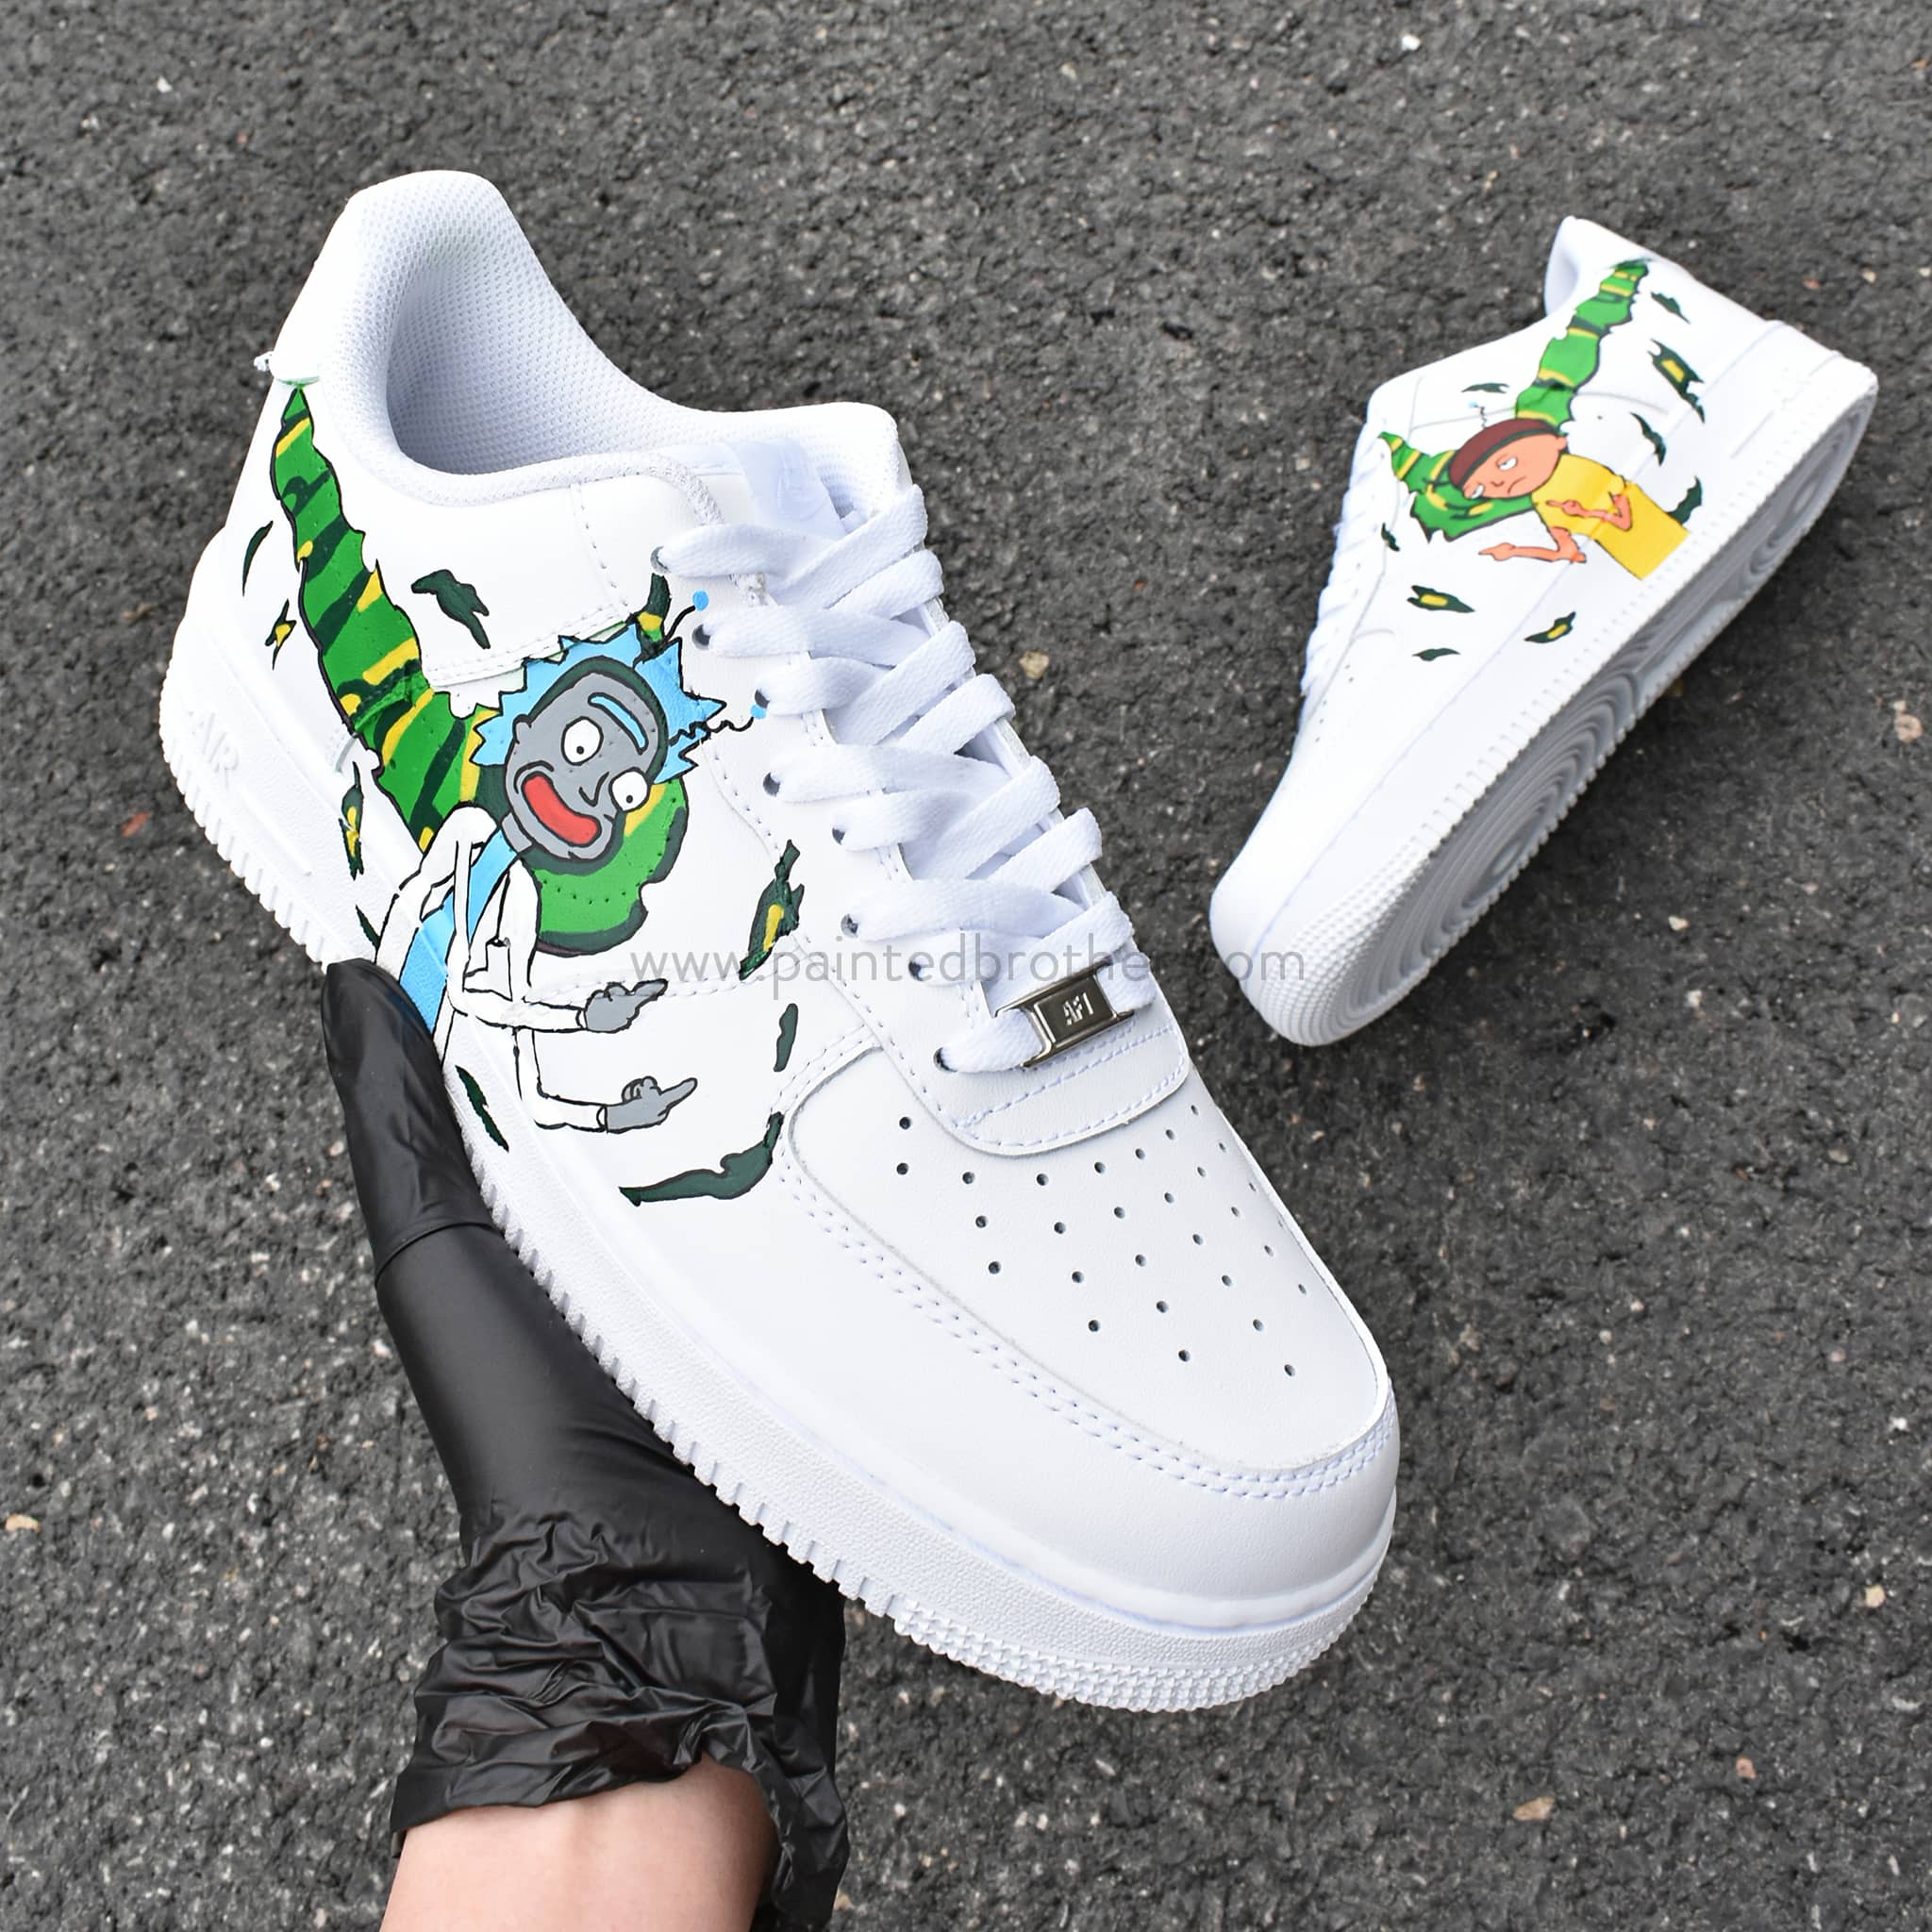 Rick and Morty Custom Hand Painted Shoes Nike Air Force 1-paintedbrother